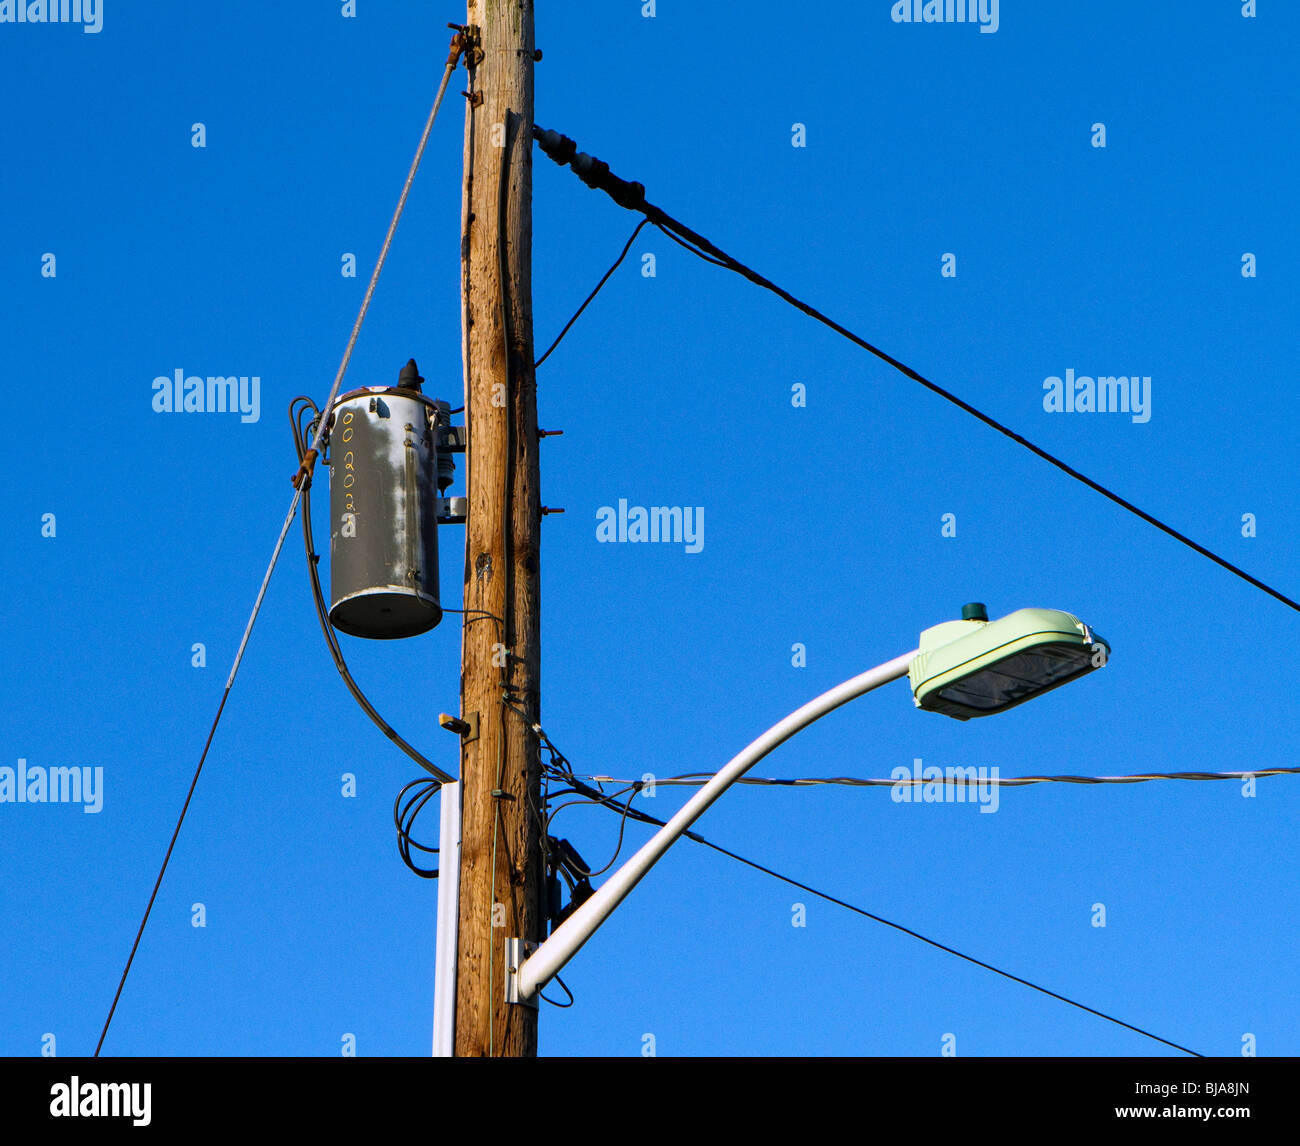 Utility pole with street lamp, wires and transformer. Stock Photo